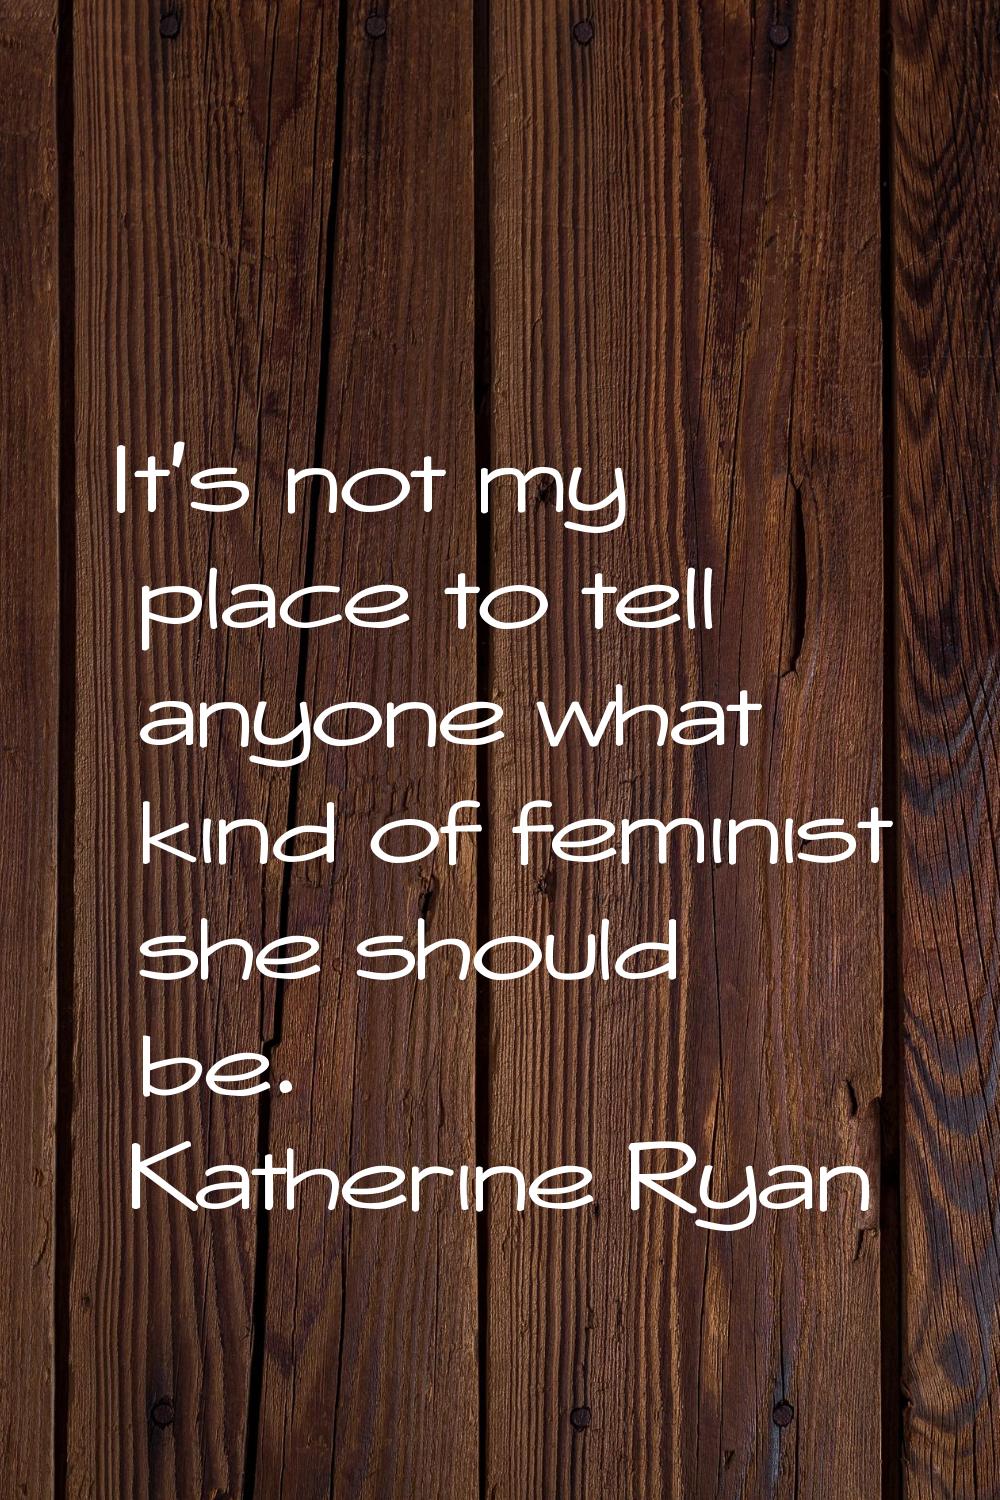 It's not my place to tell anyone what kind of feminist she should be.